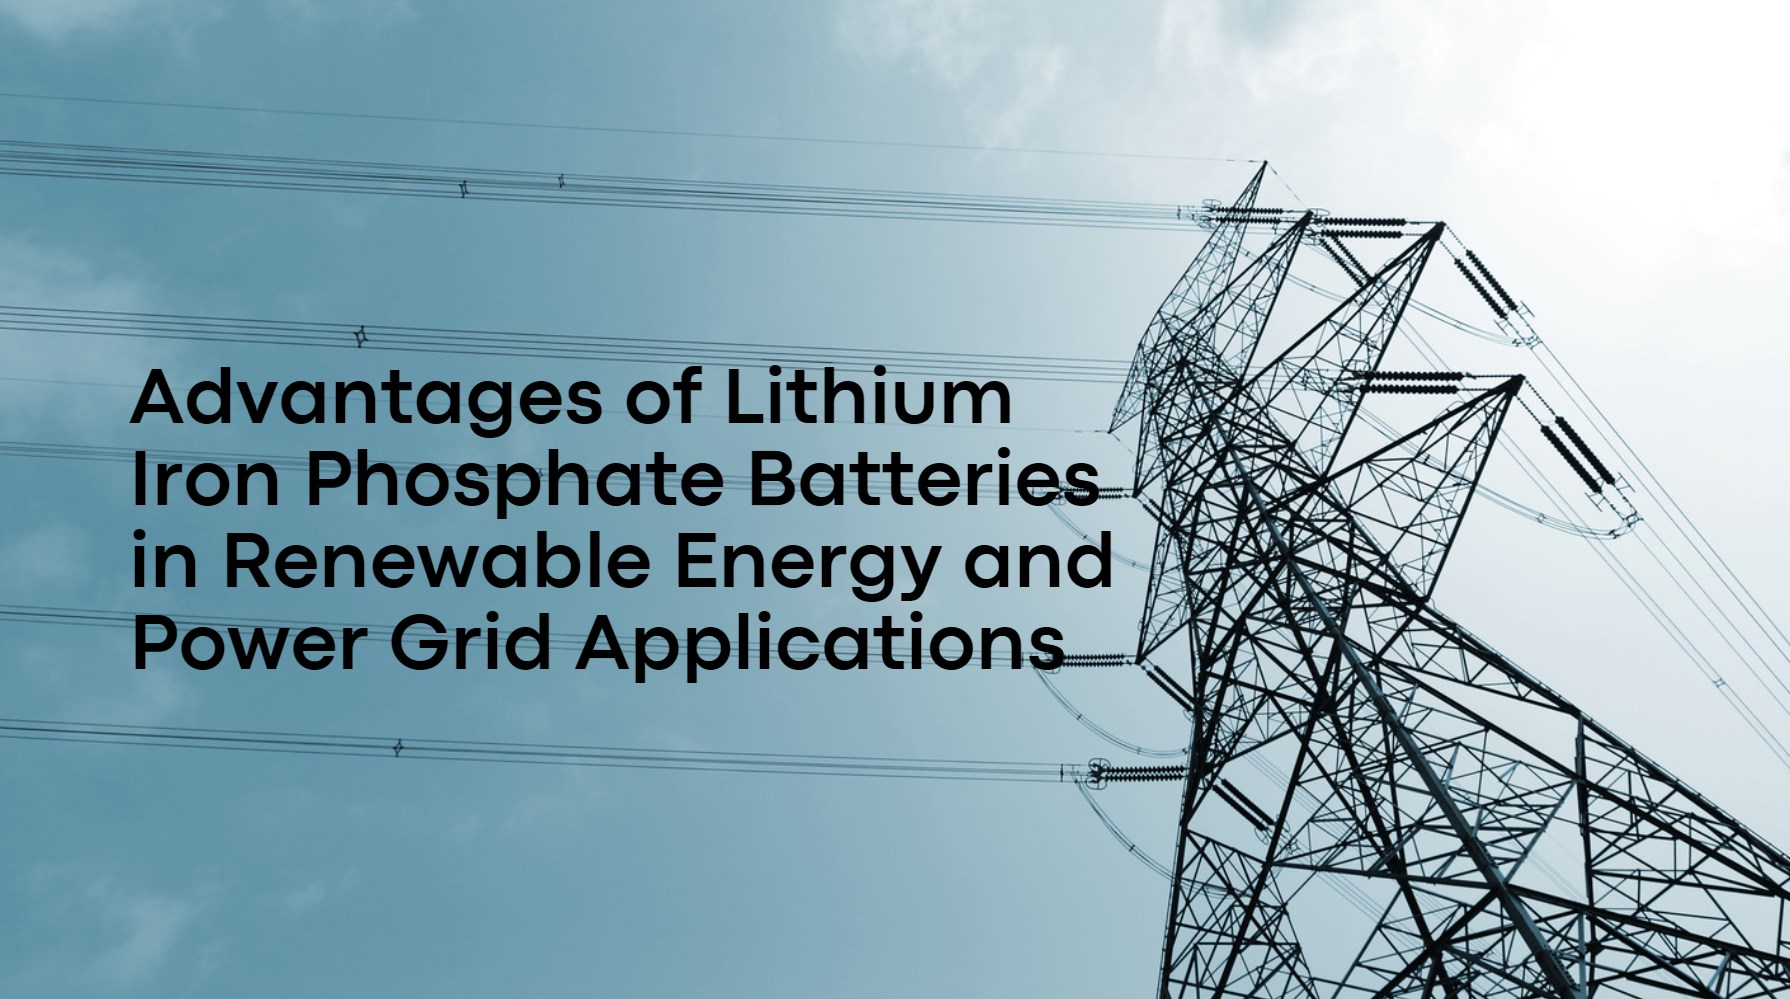 Advantages of Lithium Iron Phosphate Batteries in Renewable Energy and Power Grid Applications